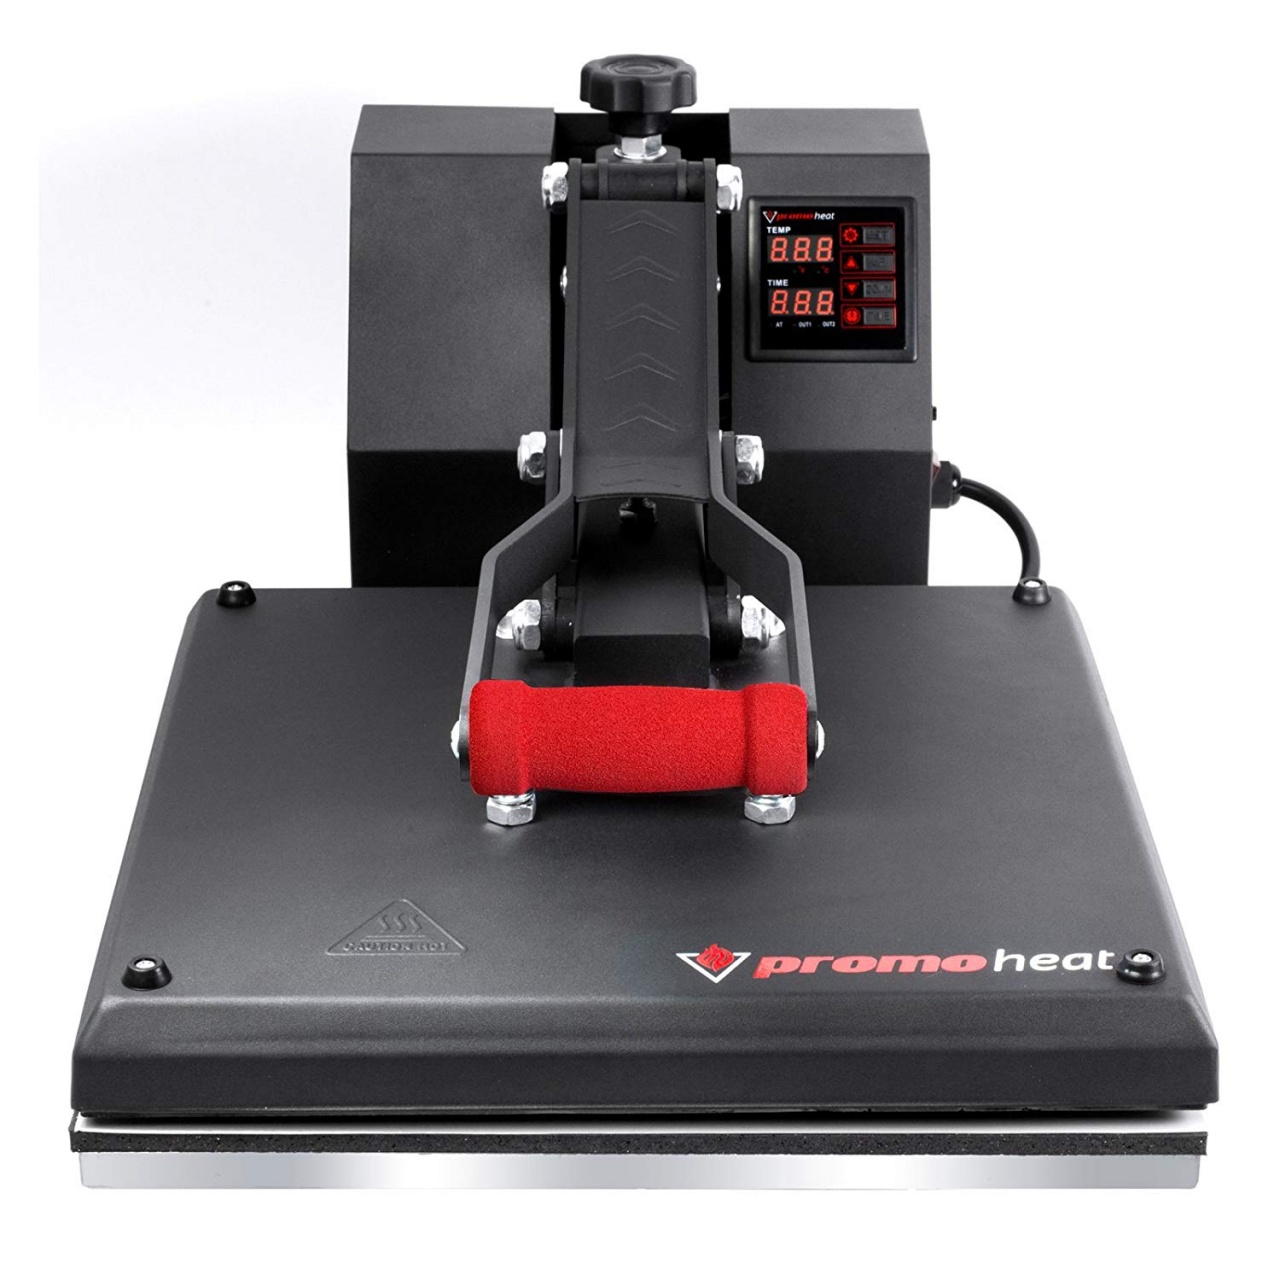 Top 3 heat press machines of this year